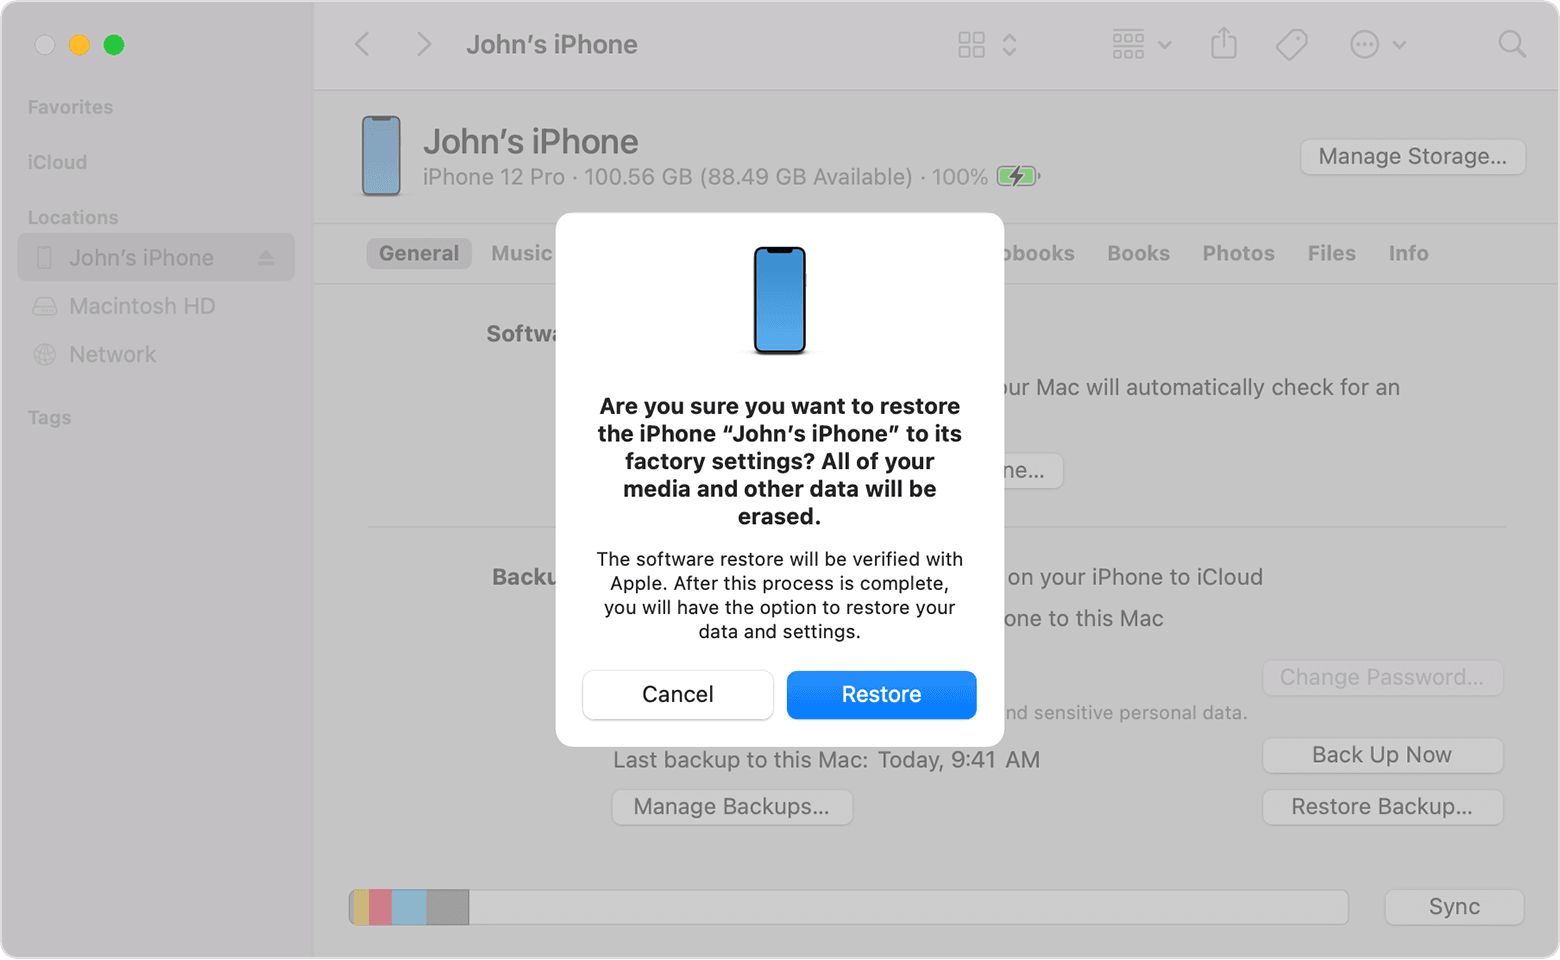 Make sure you have a recent backup of your iPhone as restoring it will erase all data and settings.
Connect your iPhone to your computer and open iTunes.